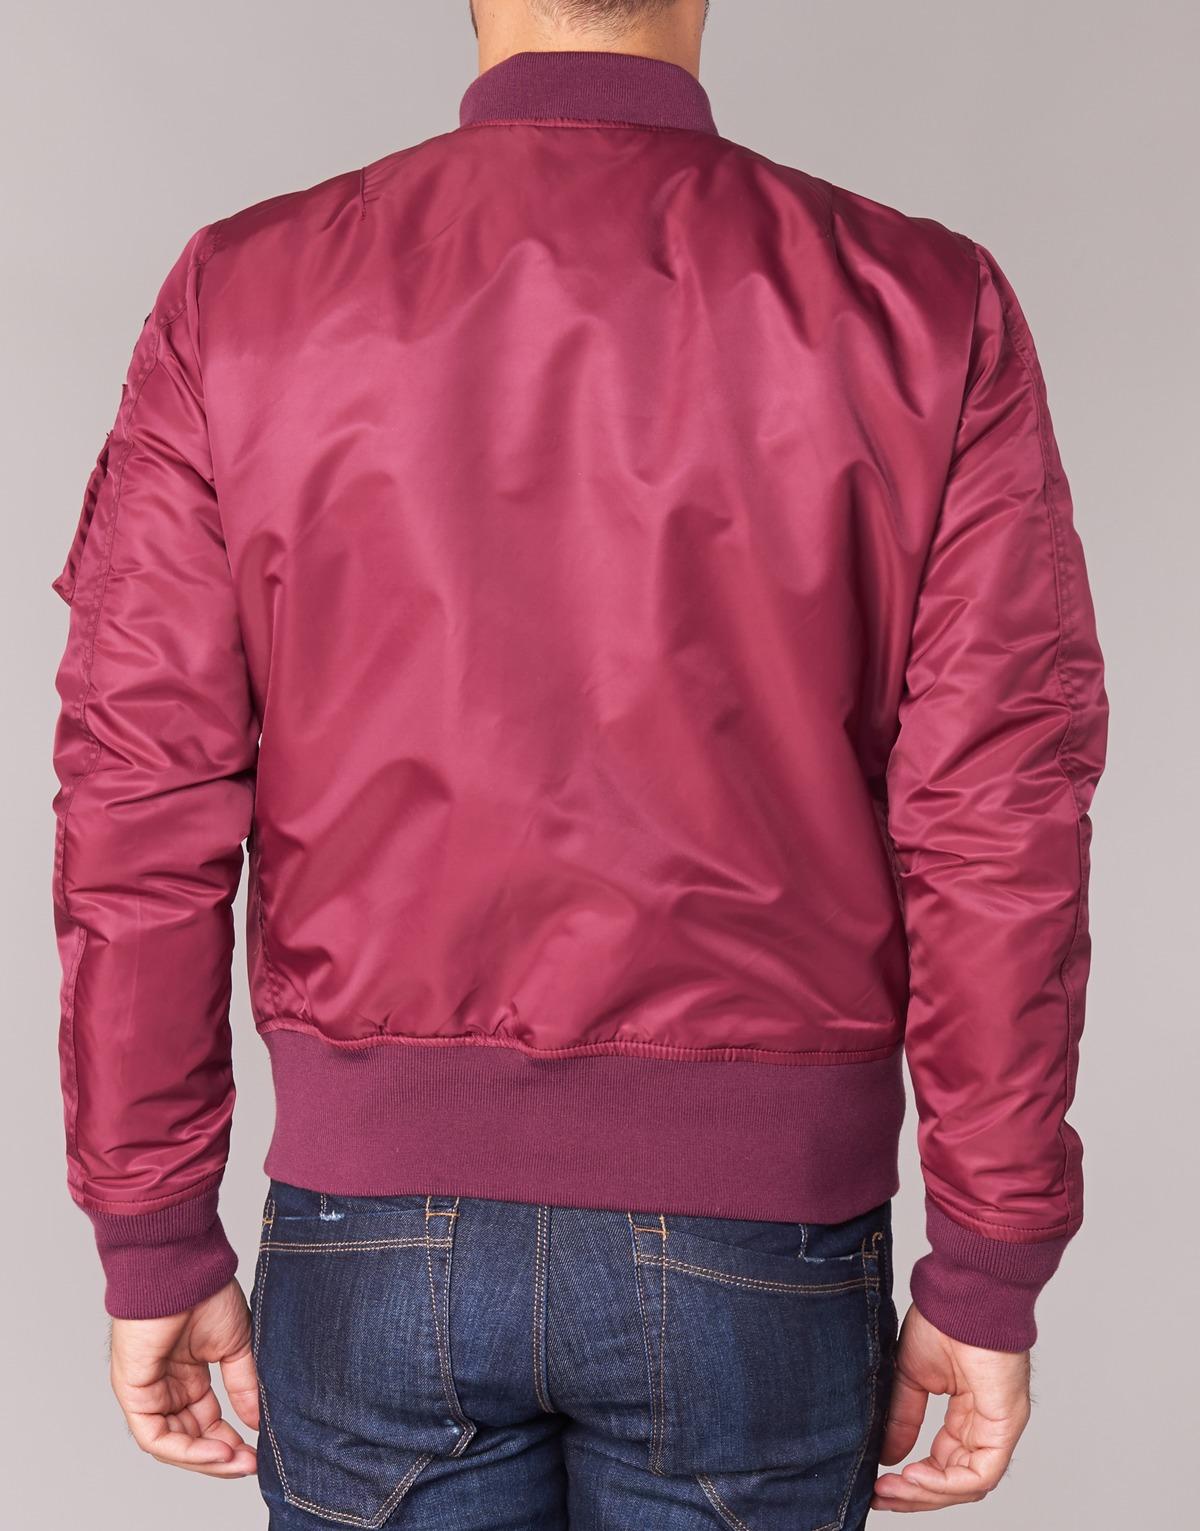 Schott Nyc Synthetic Bomber By Jacket in Red for Men - Lyst